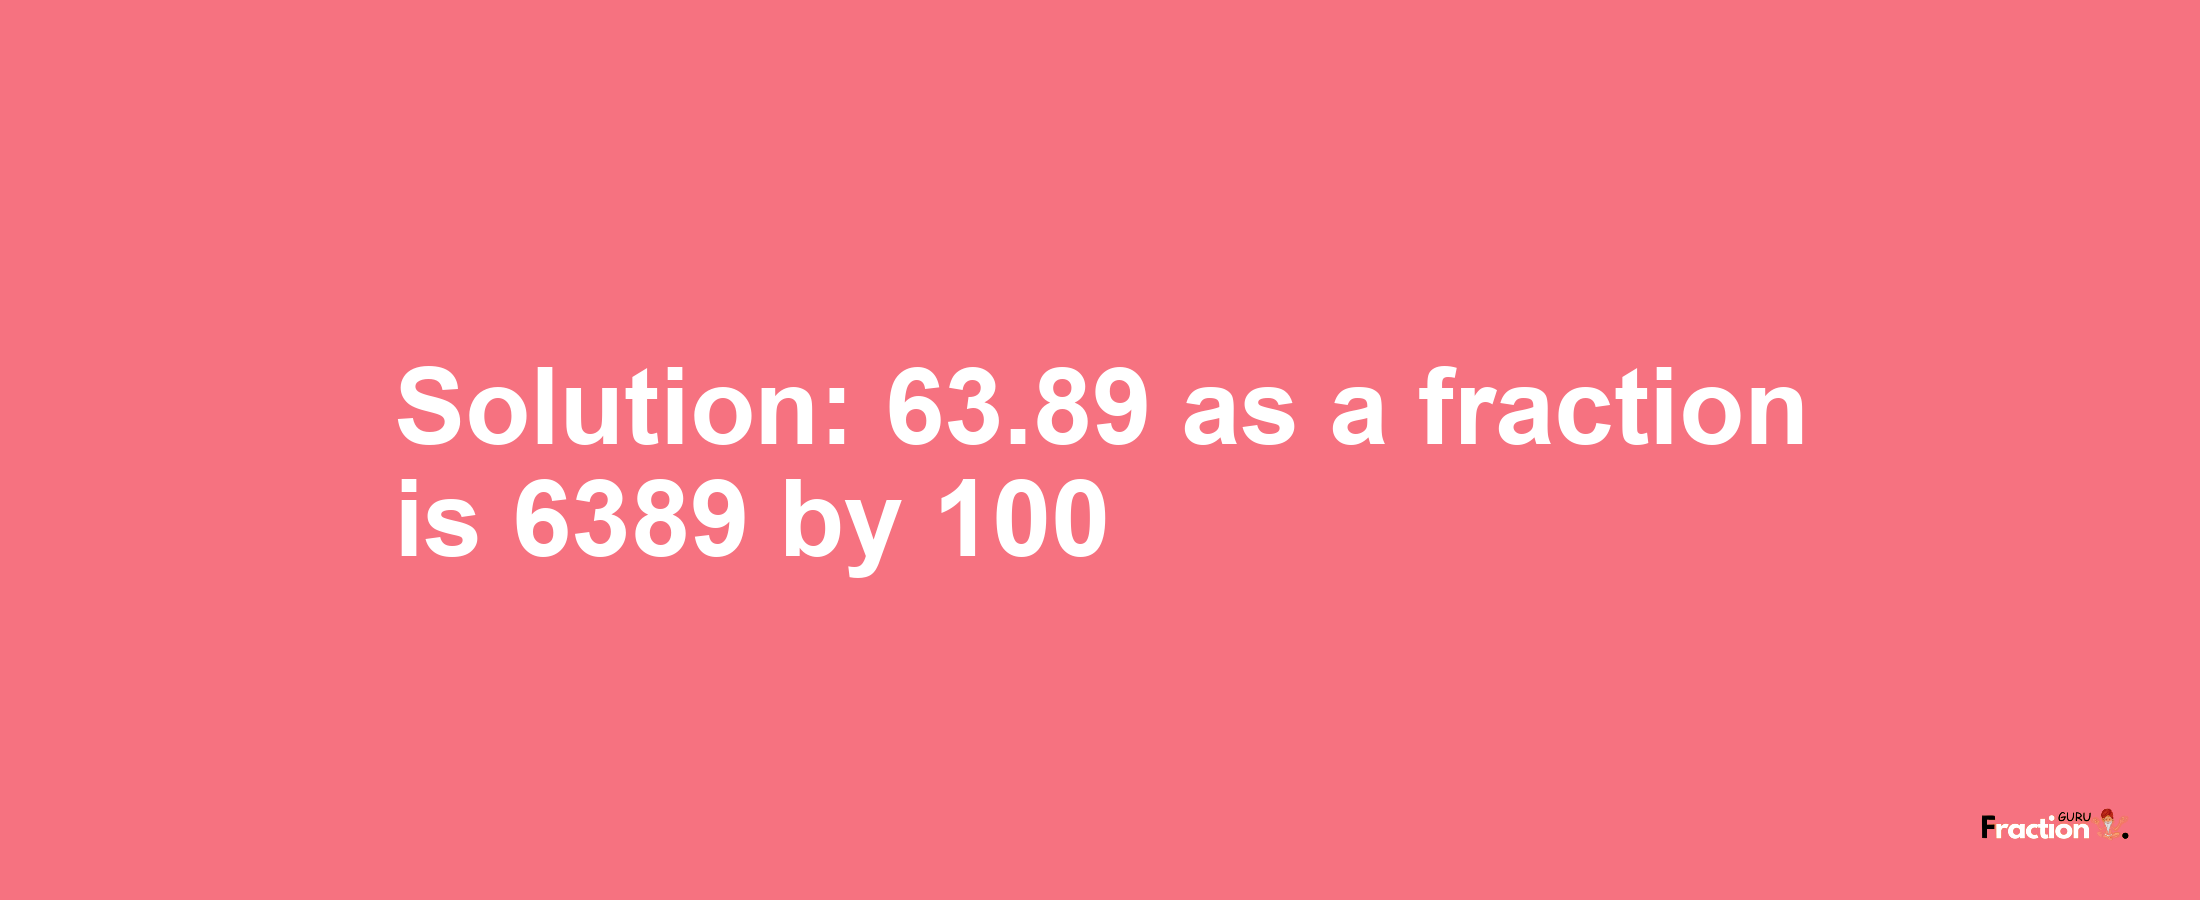 Solution:63.89 as a fraction is 6389/100